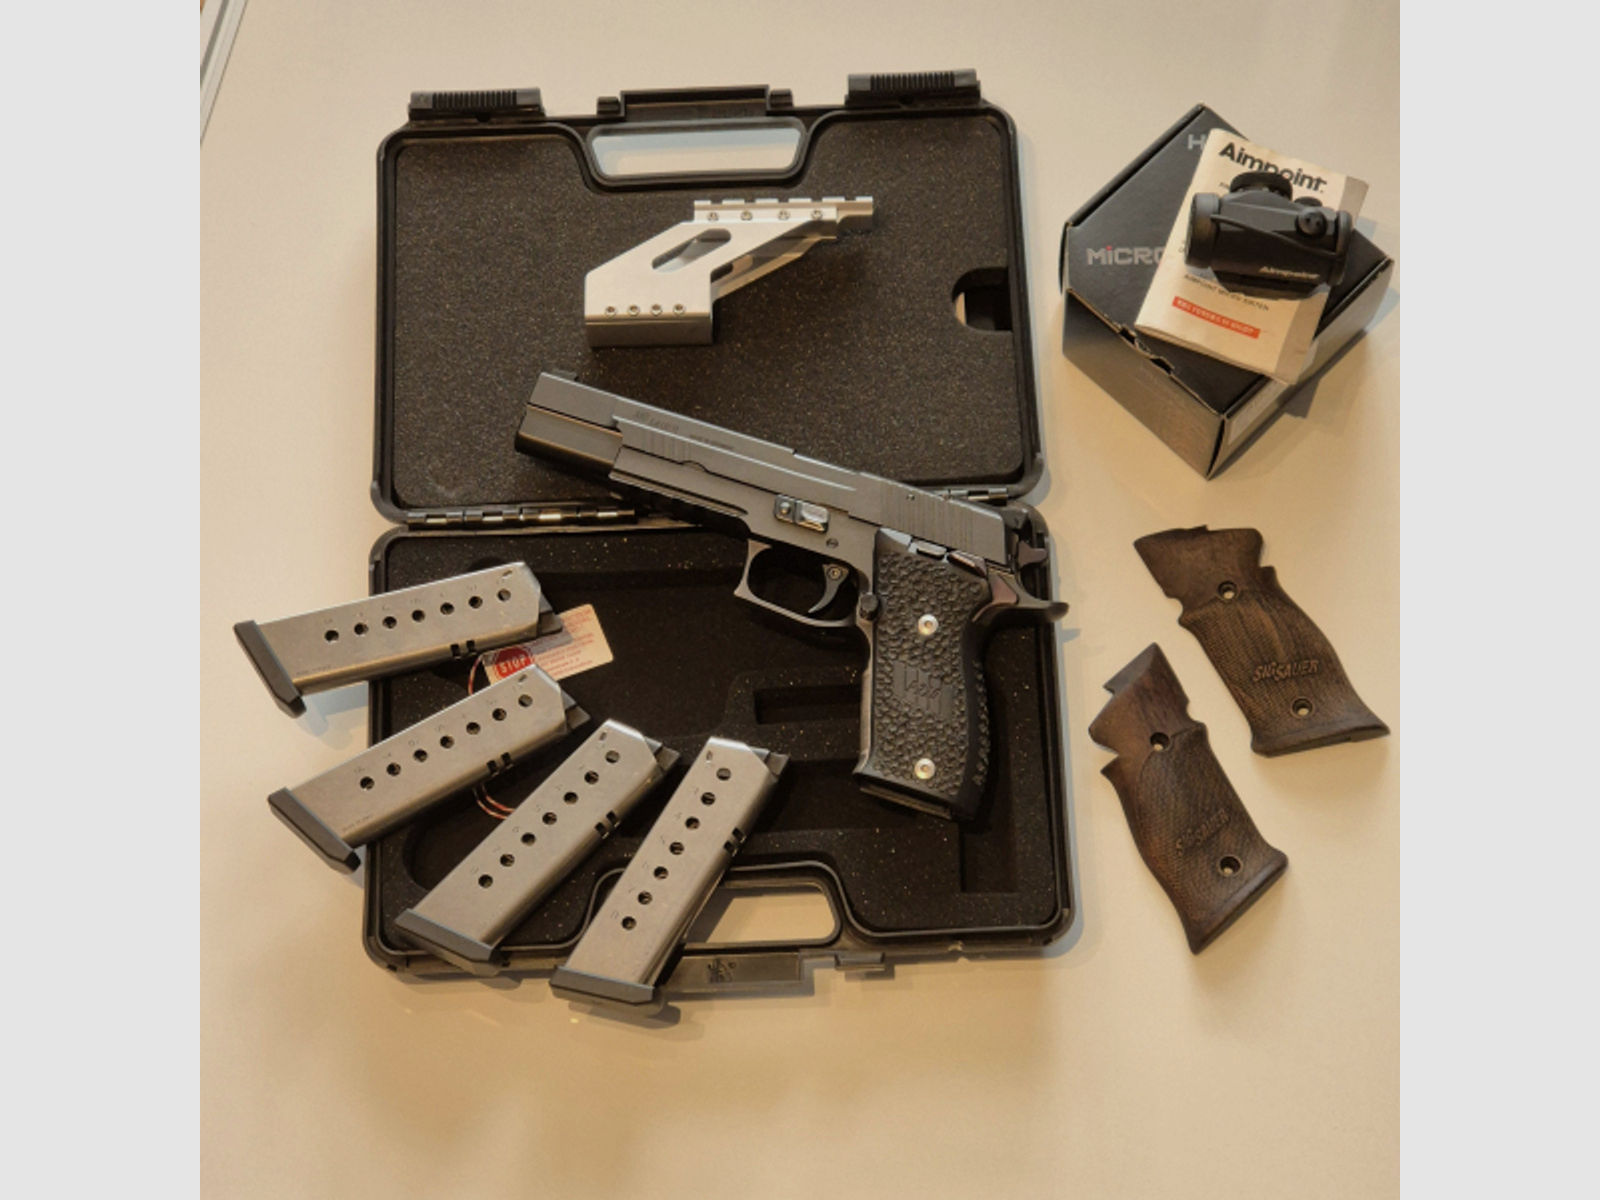 SIG Sauer P220 X6 .45 ACP Gen 1 made in Germany